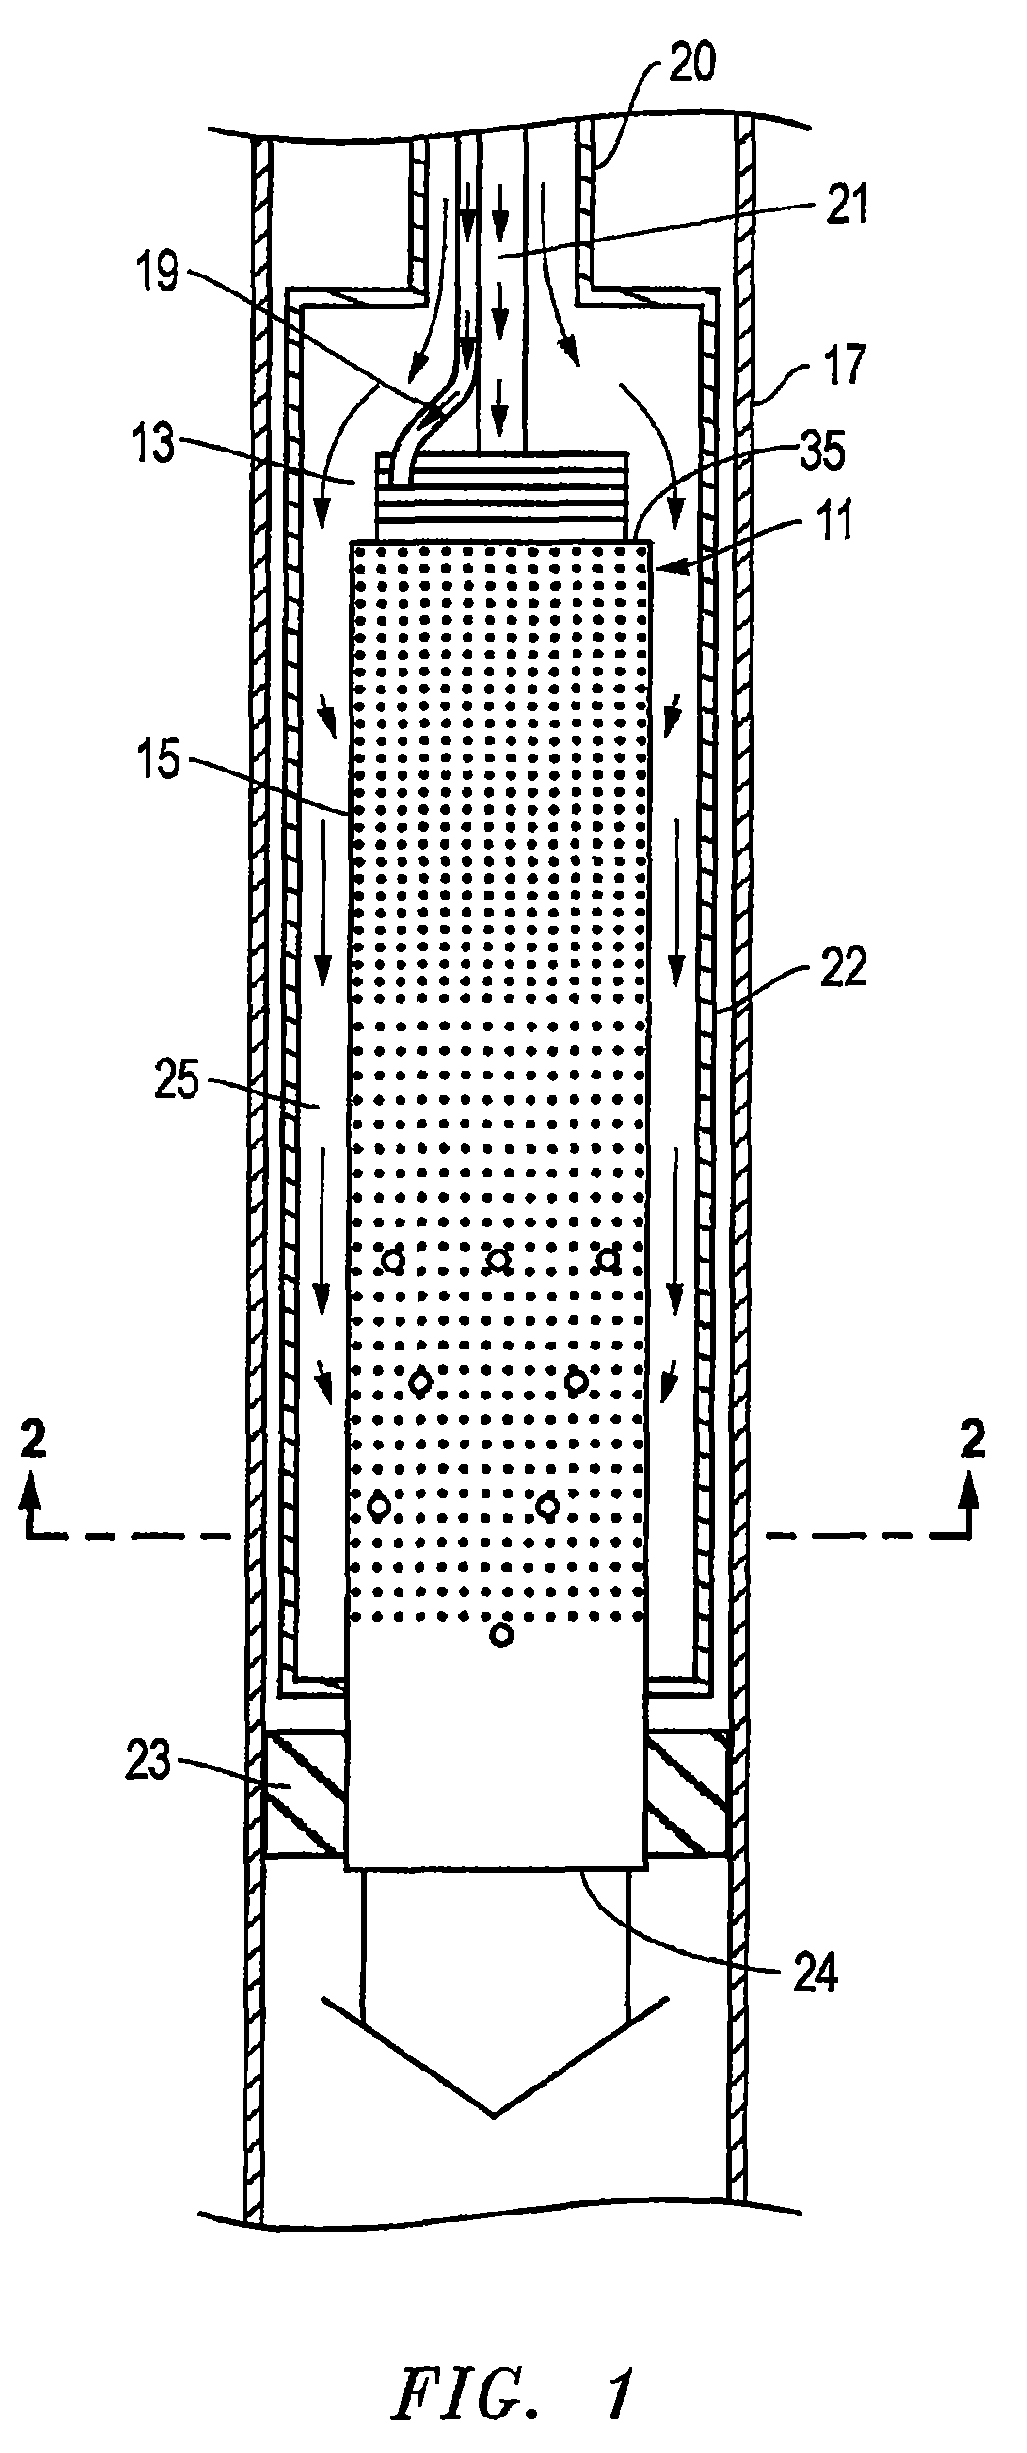 Process for dispersing nanocatalysts into petroleum-bearing formations